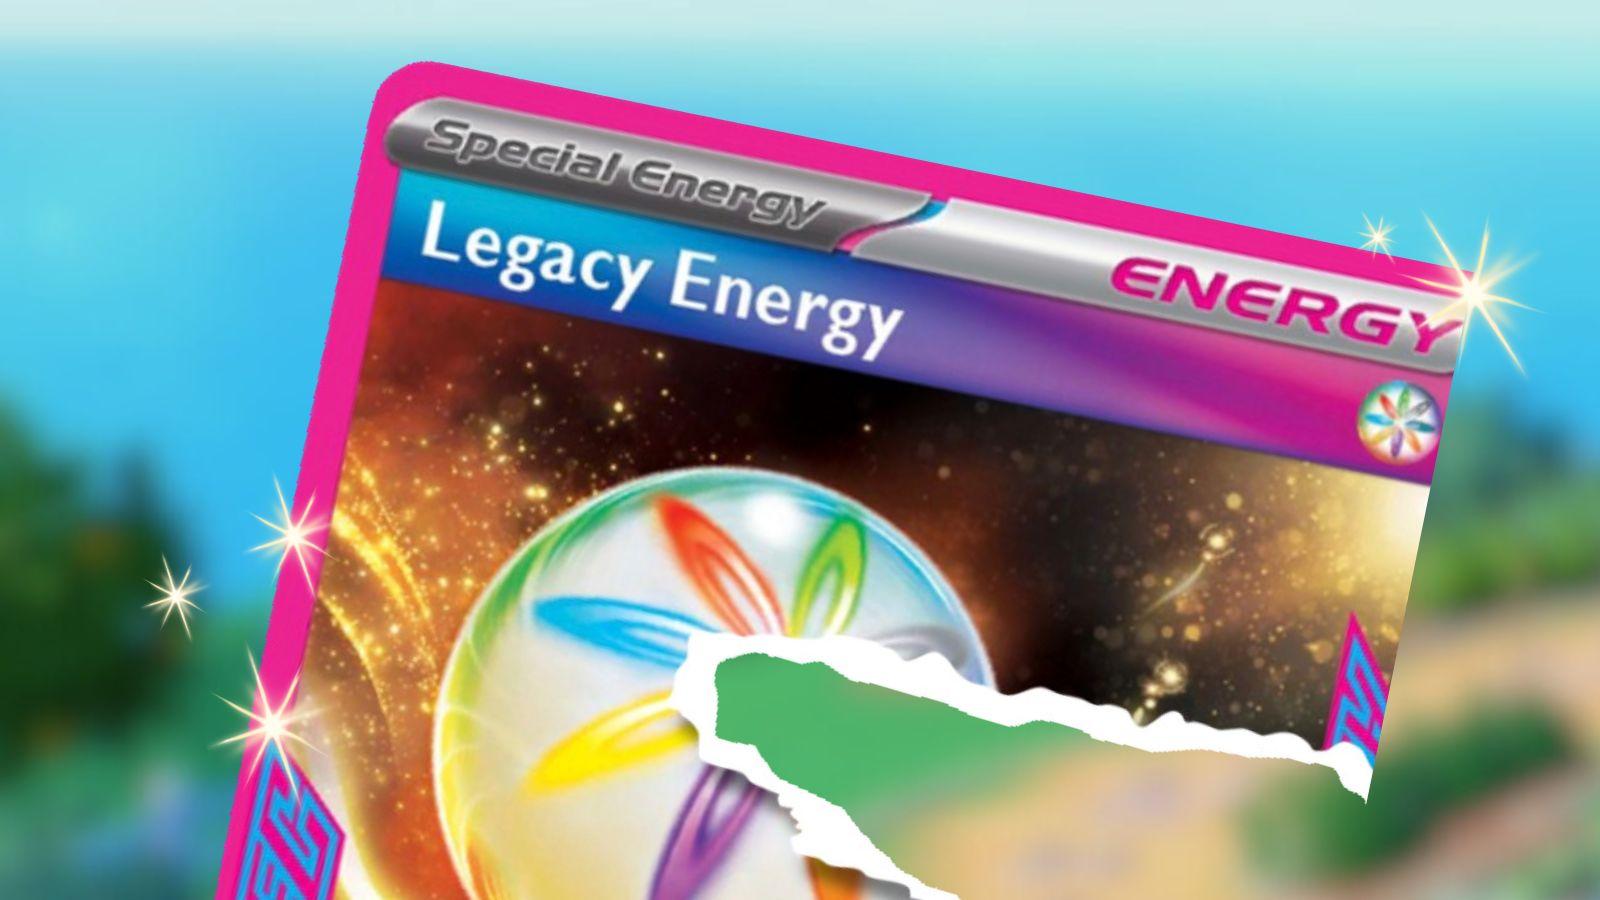 ACE SPEC Legacy Energy card with tear and Pokemon background.